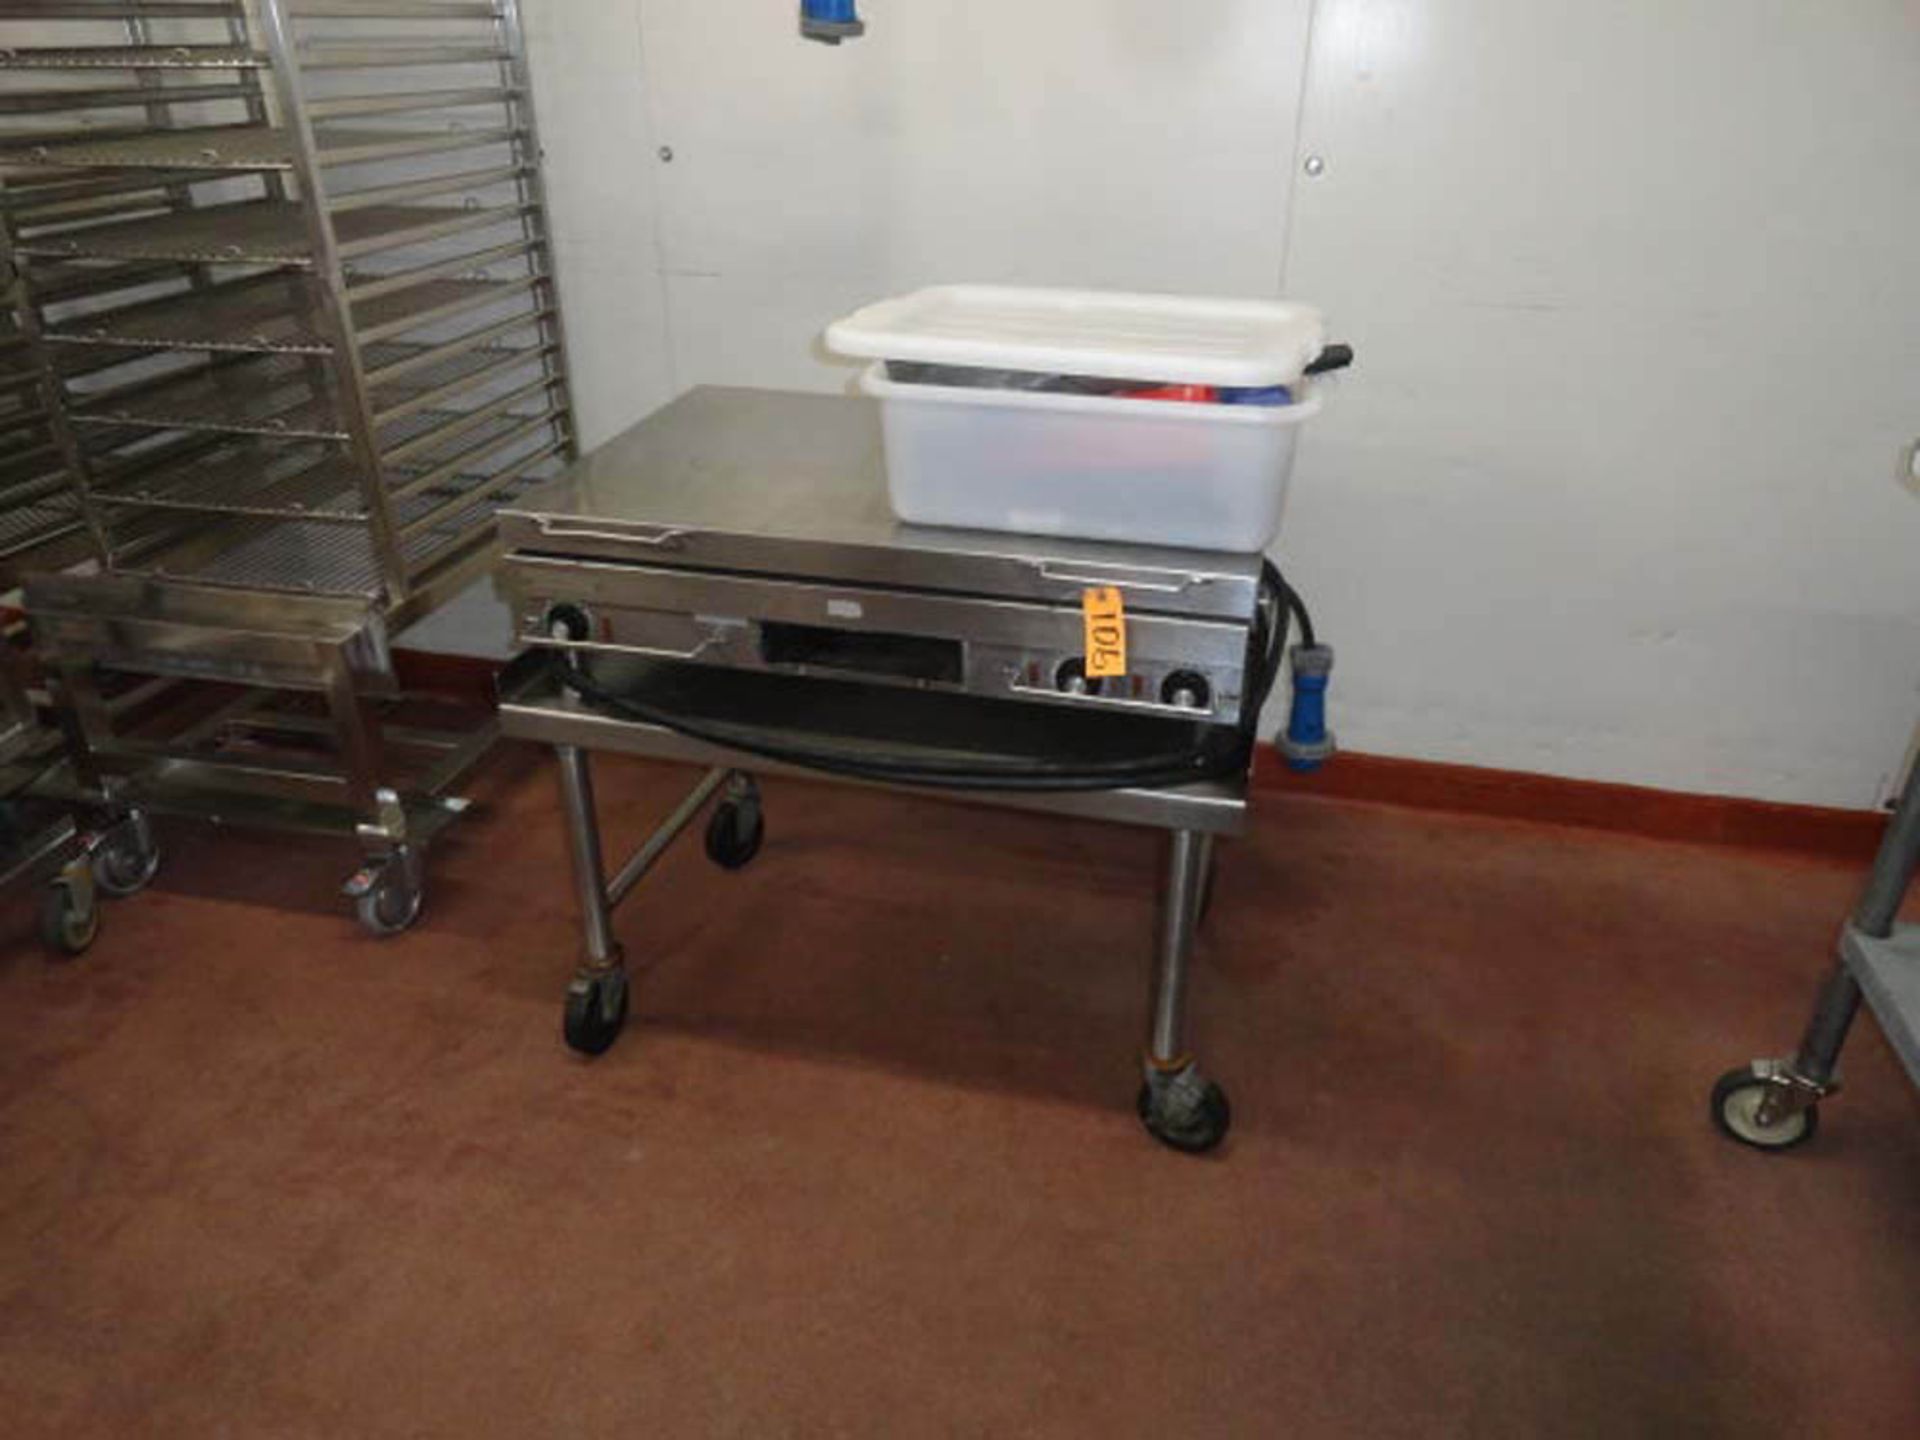 TOASTMASTER GRIDDLE, 30" ON STAINLESS STEEL CART, ELECTRIC - Image 2 of 2